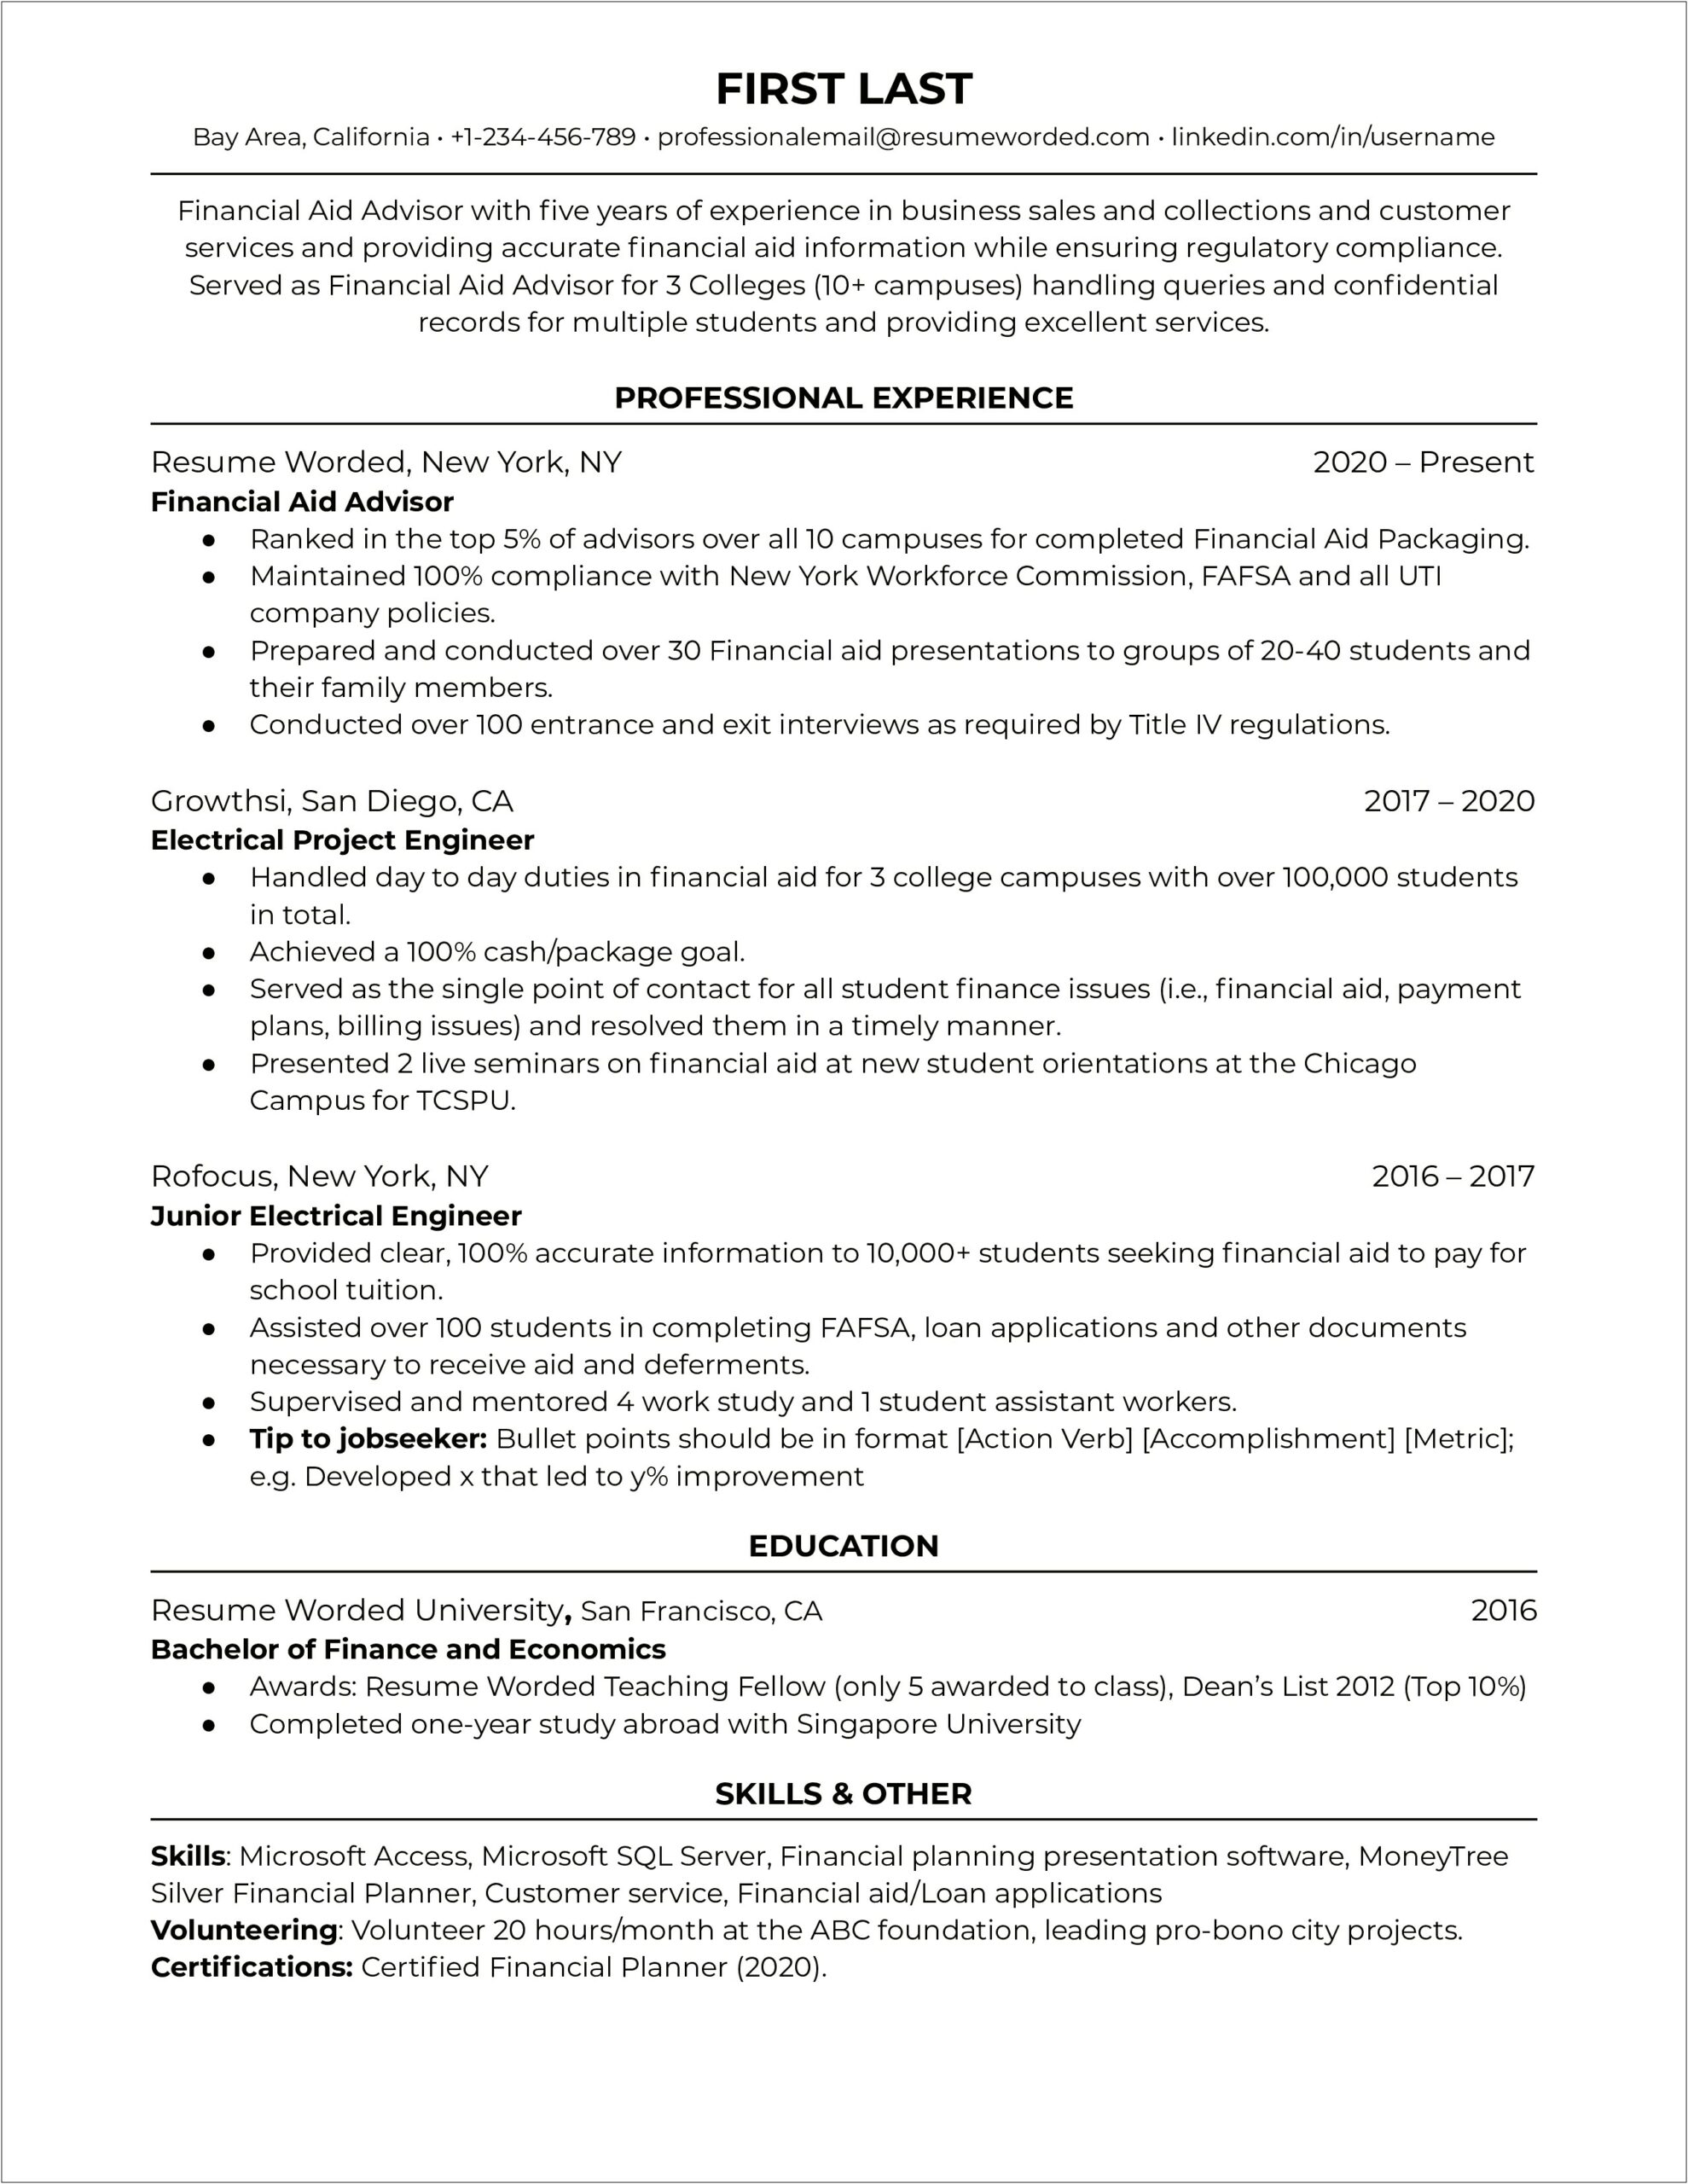 Financial Aid Director Resume Objective